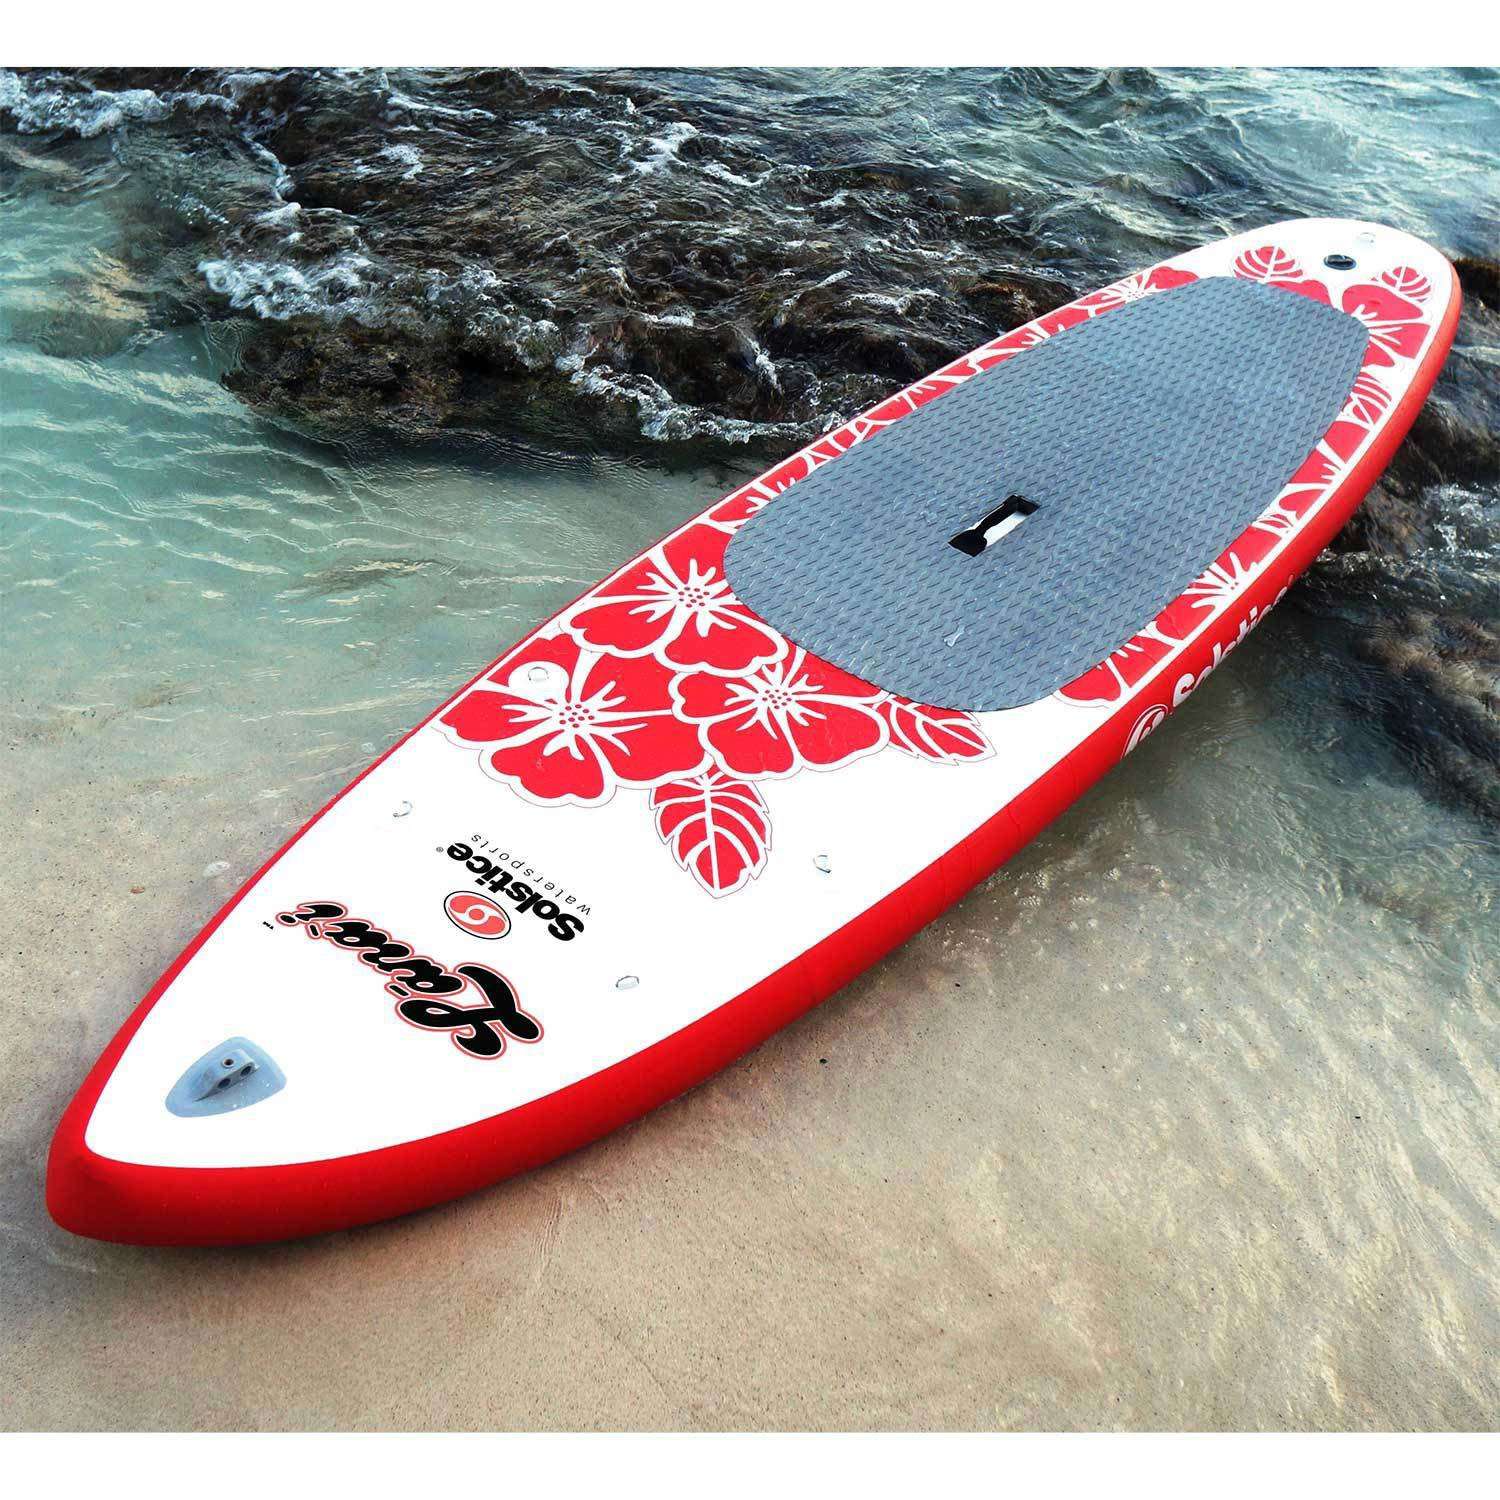 Swimline Solstice 35125 Lanai 10' 4" Inflatable Stand Up Paddleboard New